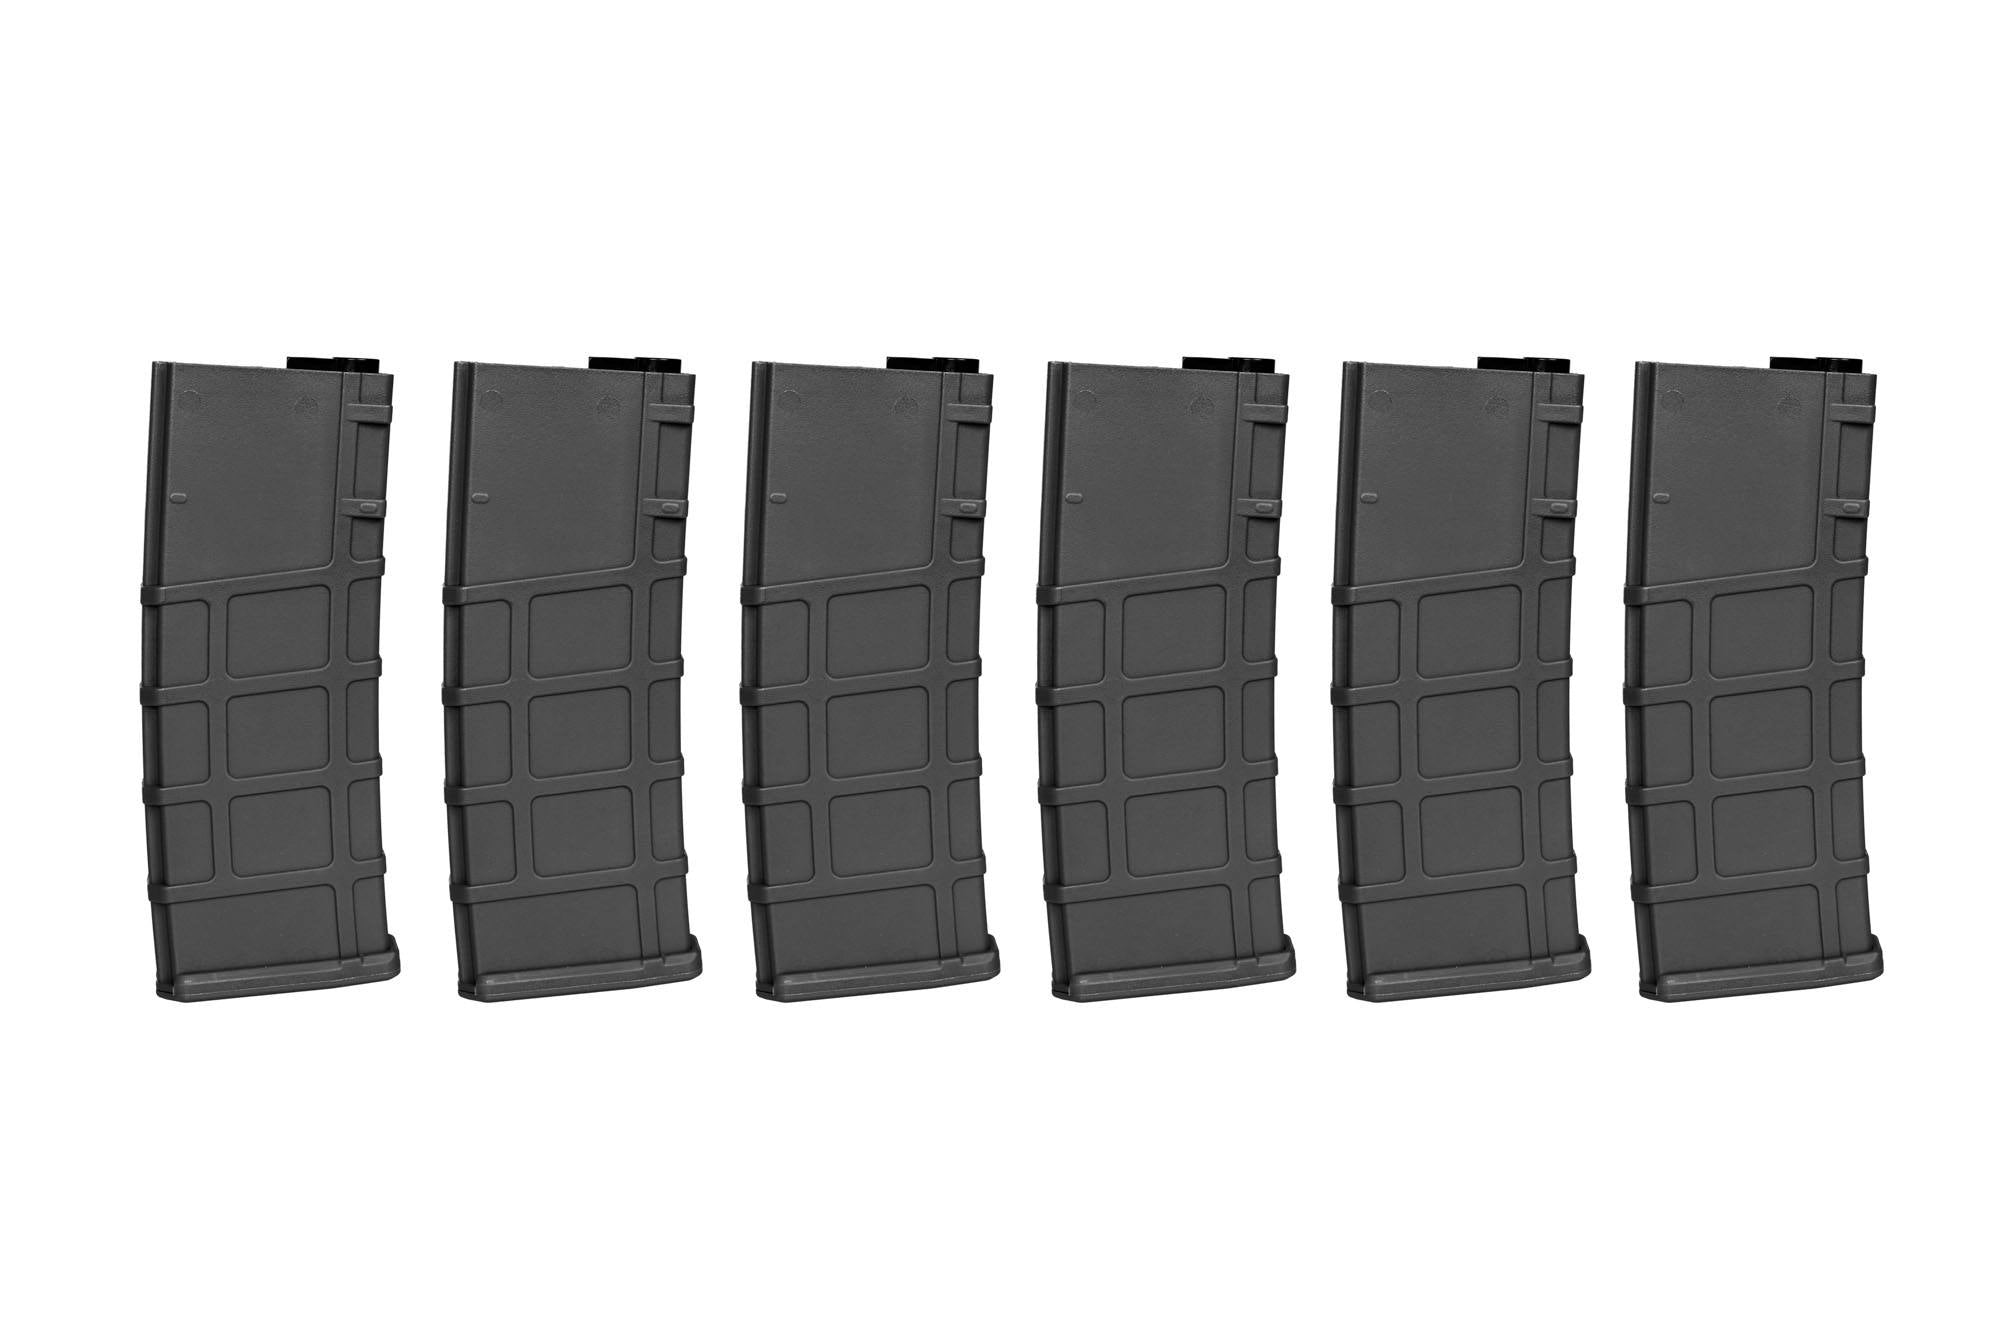 Set of 6 Polymer 30 BB's Real-Cap magazines for M4/M16 replicas - Black-2